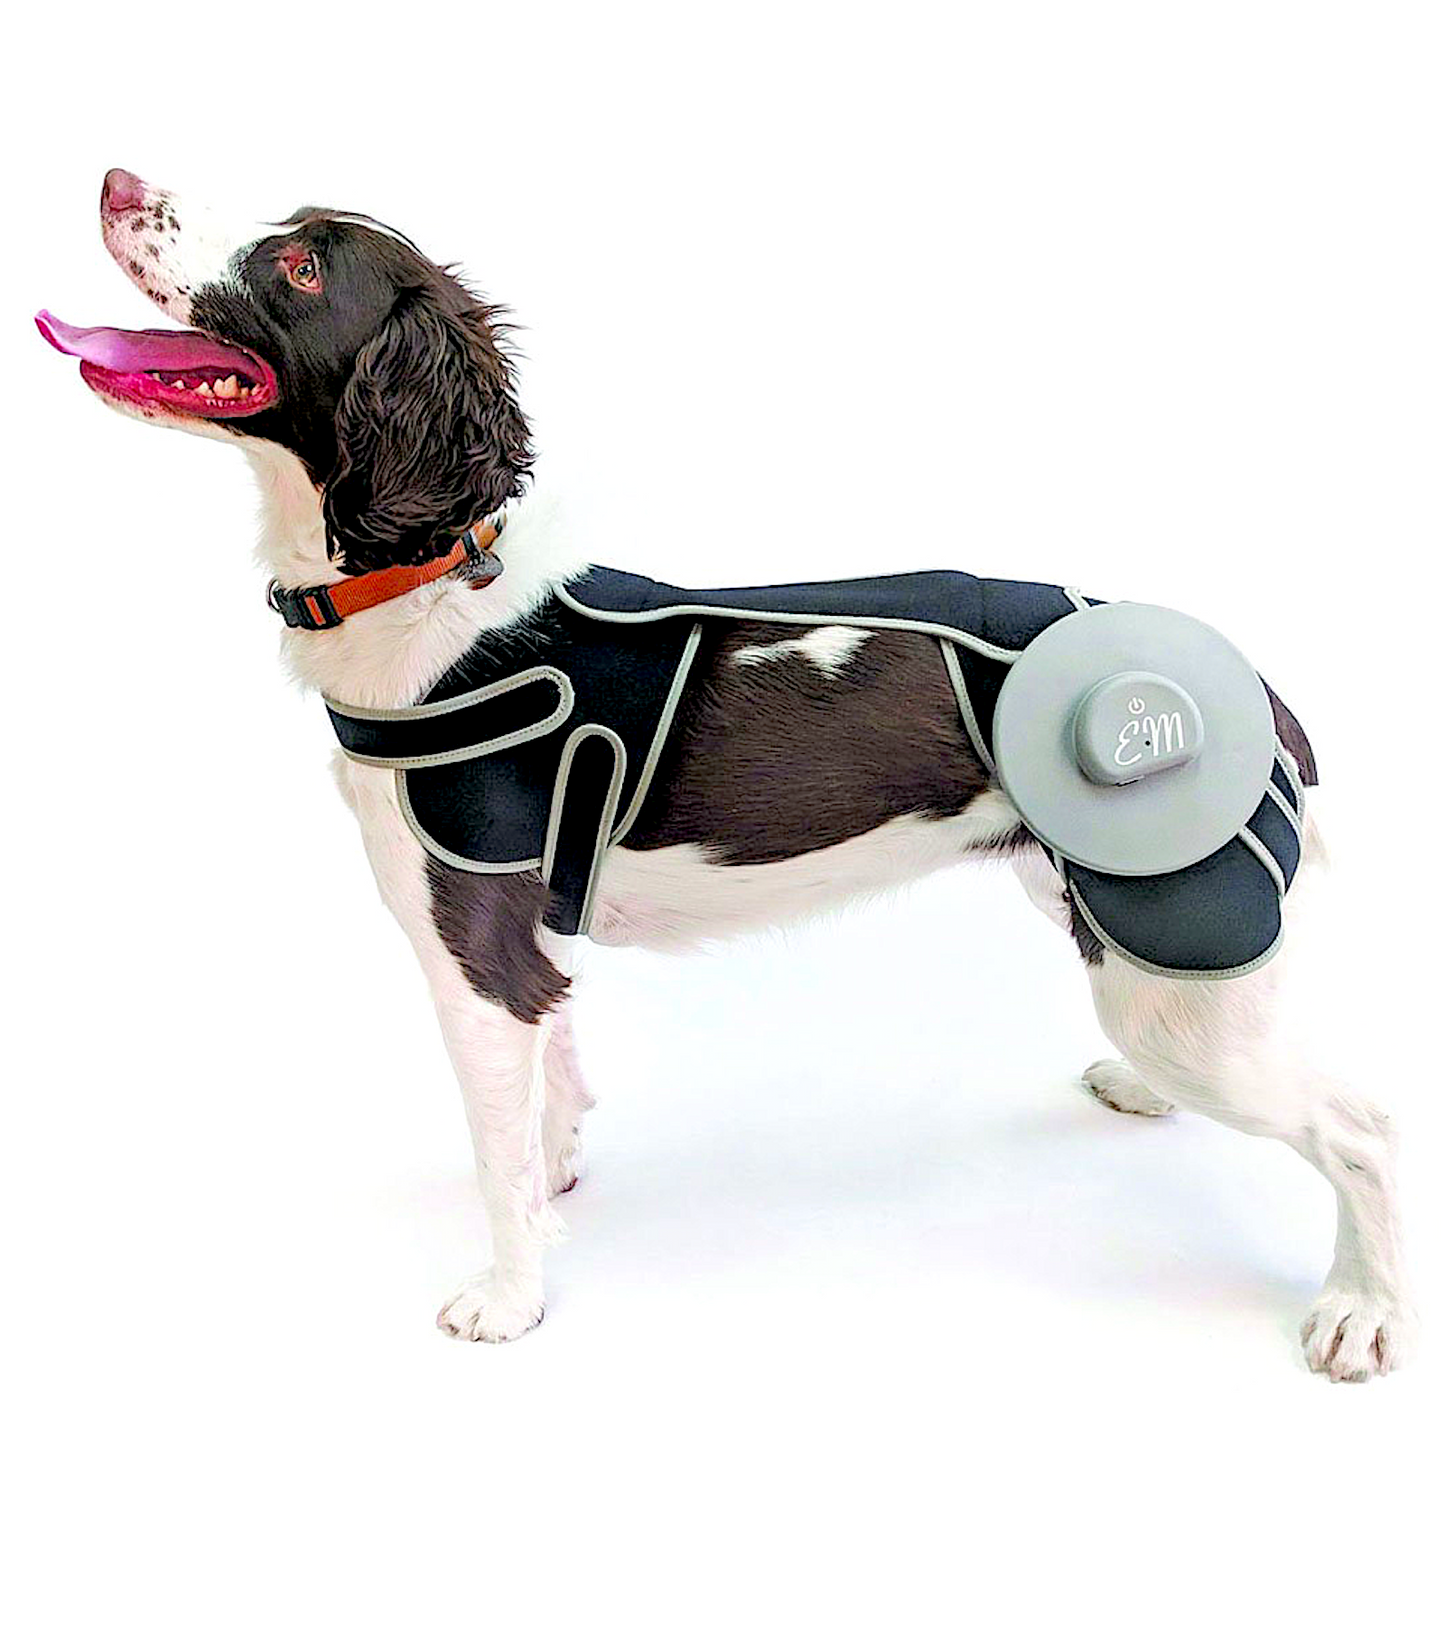 PEMF WEARABLES: helps reduce pain and swelling and increase mobility - Vital Vet